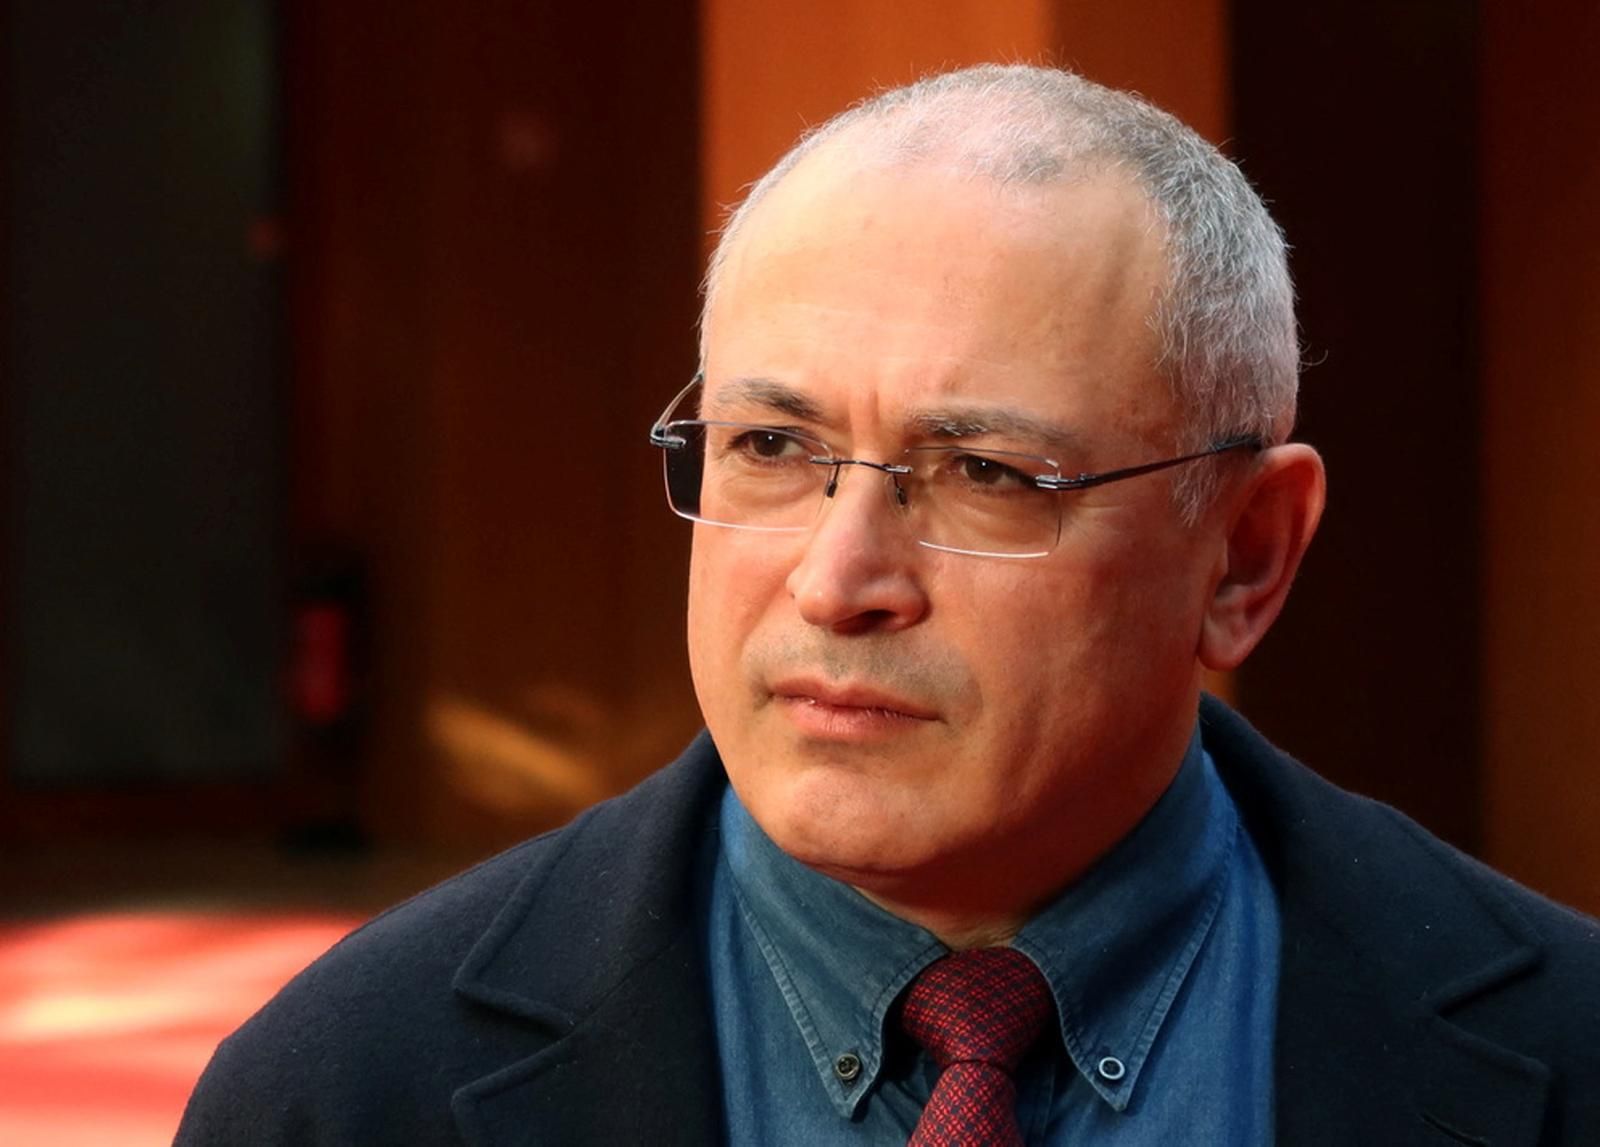 Exiled opposition activist Mikhail Khodorkovsky answers questions during a Reuters Interview in Berlin, Germany, March 24, 2022.     REUTERS/Tobias Schlie Photo: TOBIAS SCHLIE/REUTERS